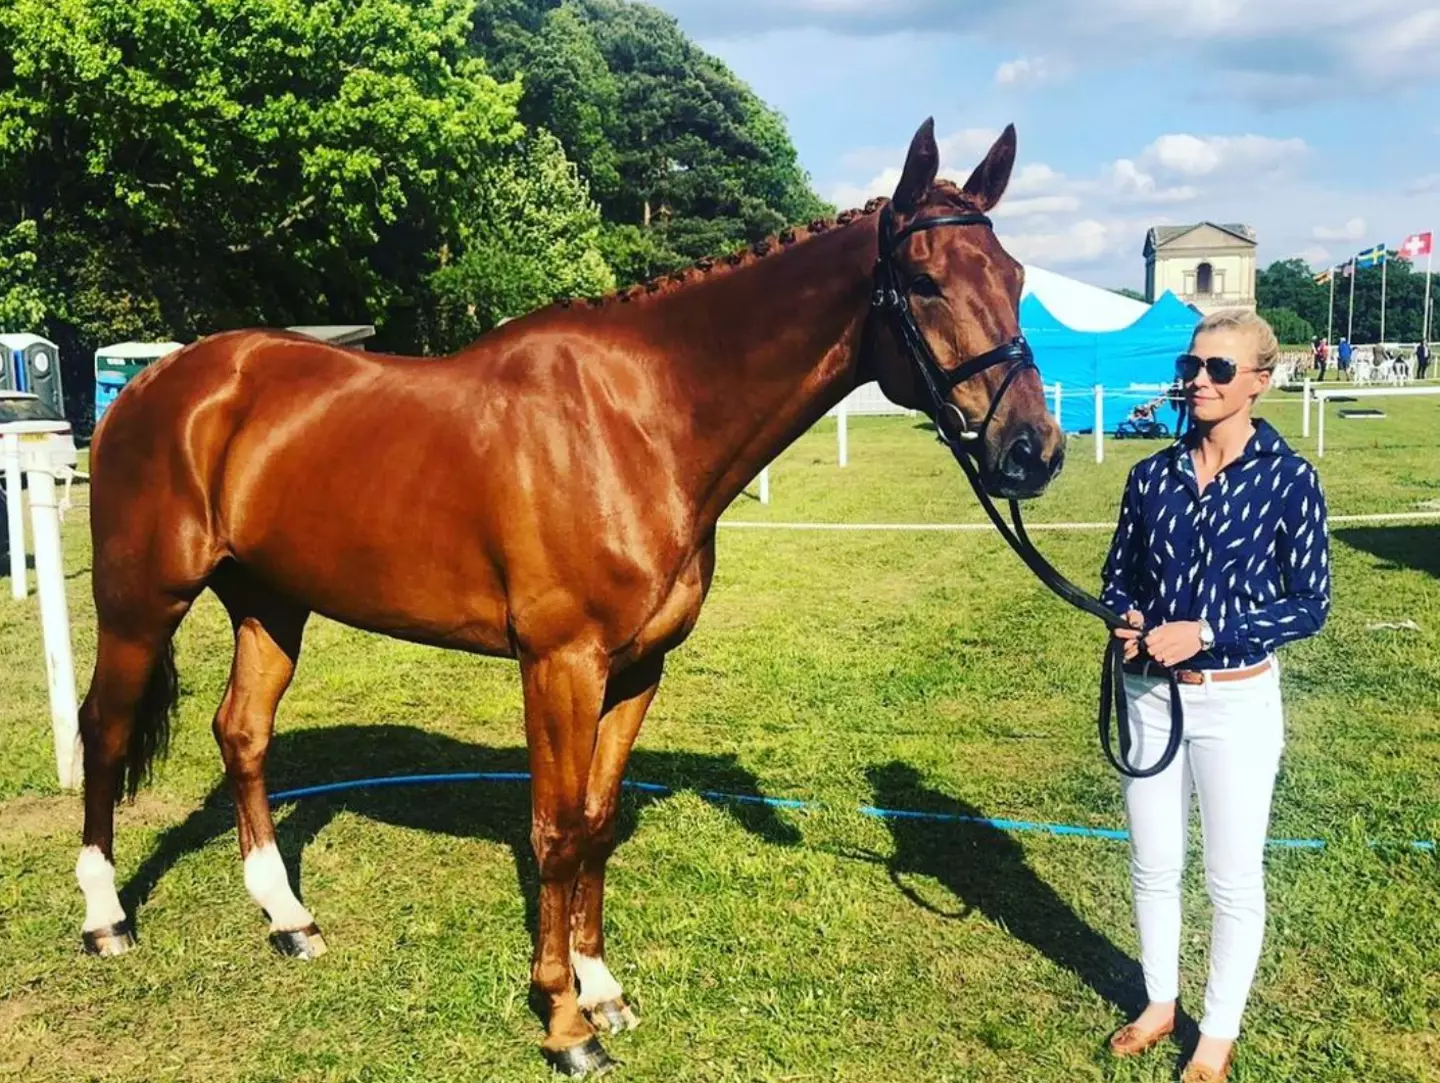 Georgie was involved in a freak accident at a recent equestrian event. (Instagram/@mrsgeorgiecampbell)